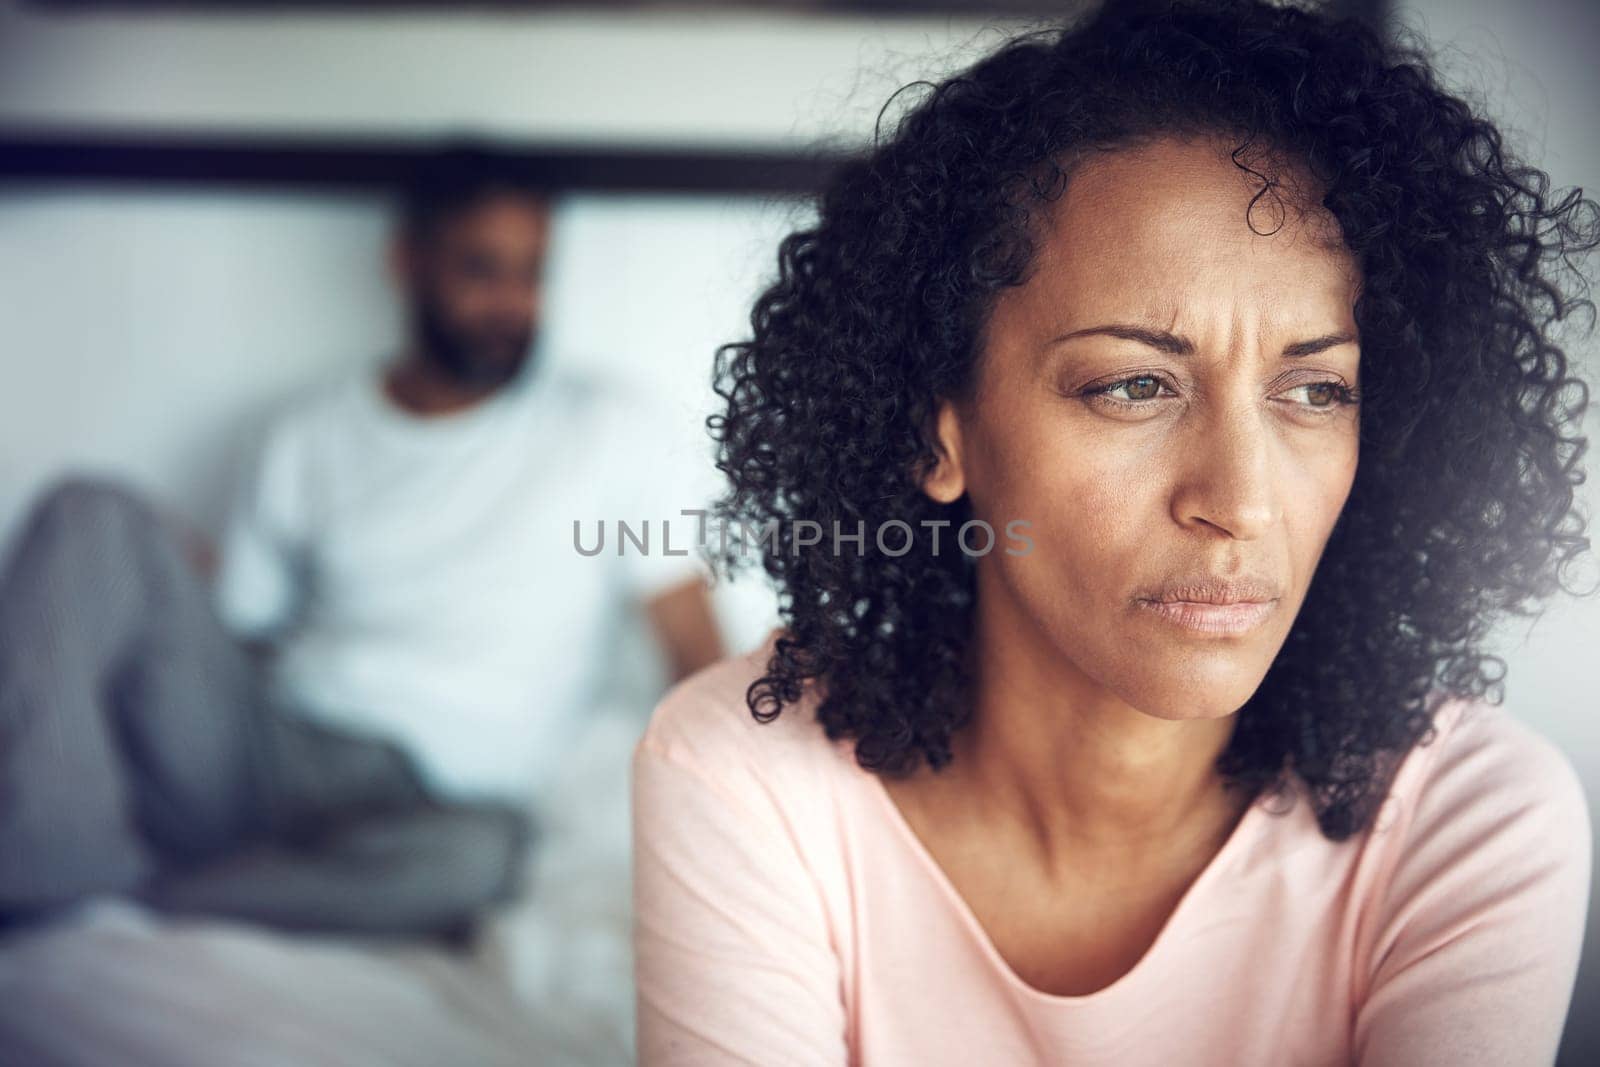 Divorce, angry black woman and couple in bedroom of their home or house. Marriage or relationship, communication or conflict and frustrated African female with breakup or couple problems inside.